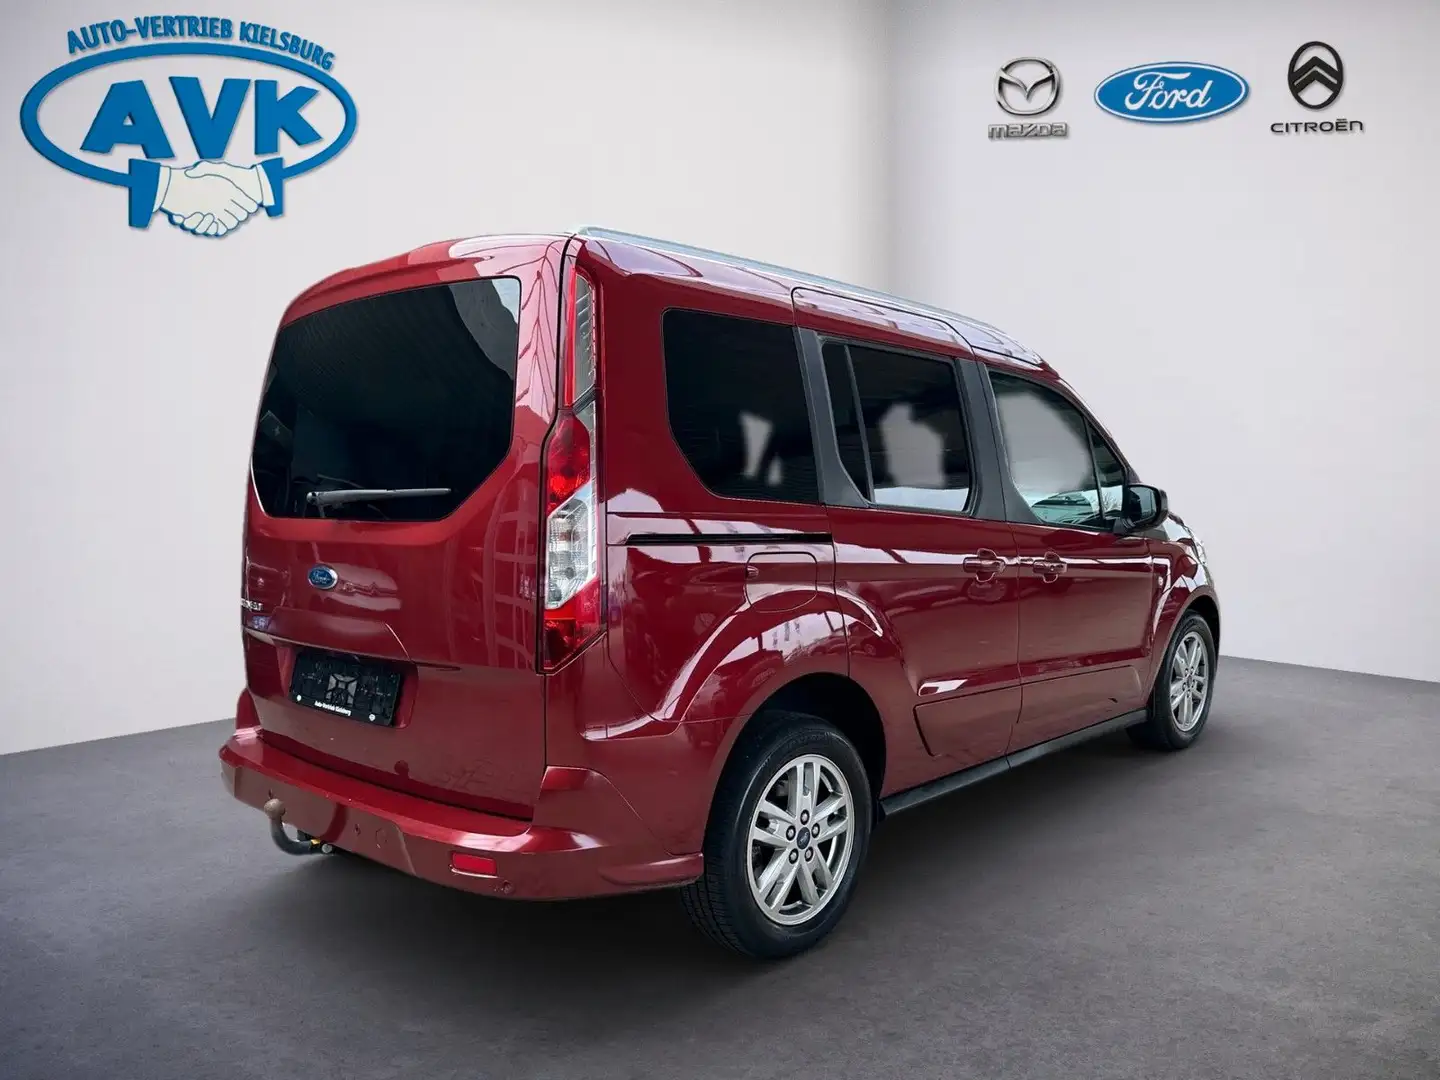 Ford Tourneo Connect crvena - 2